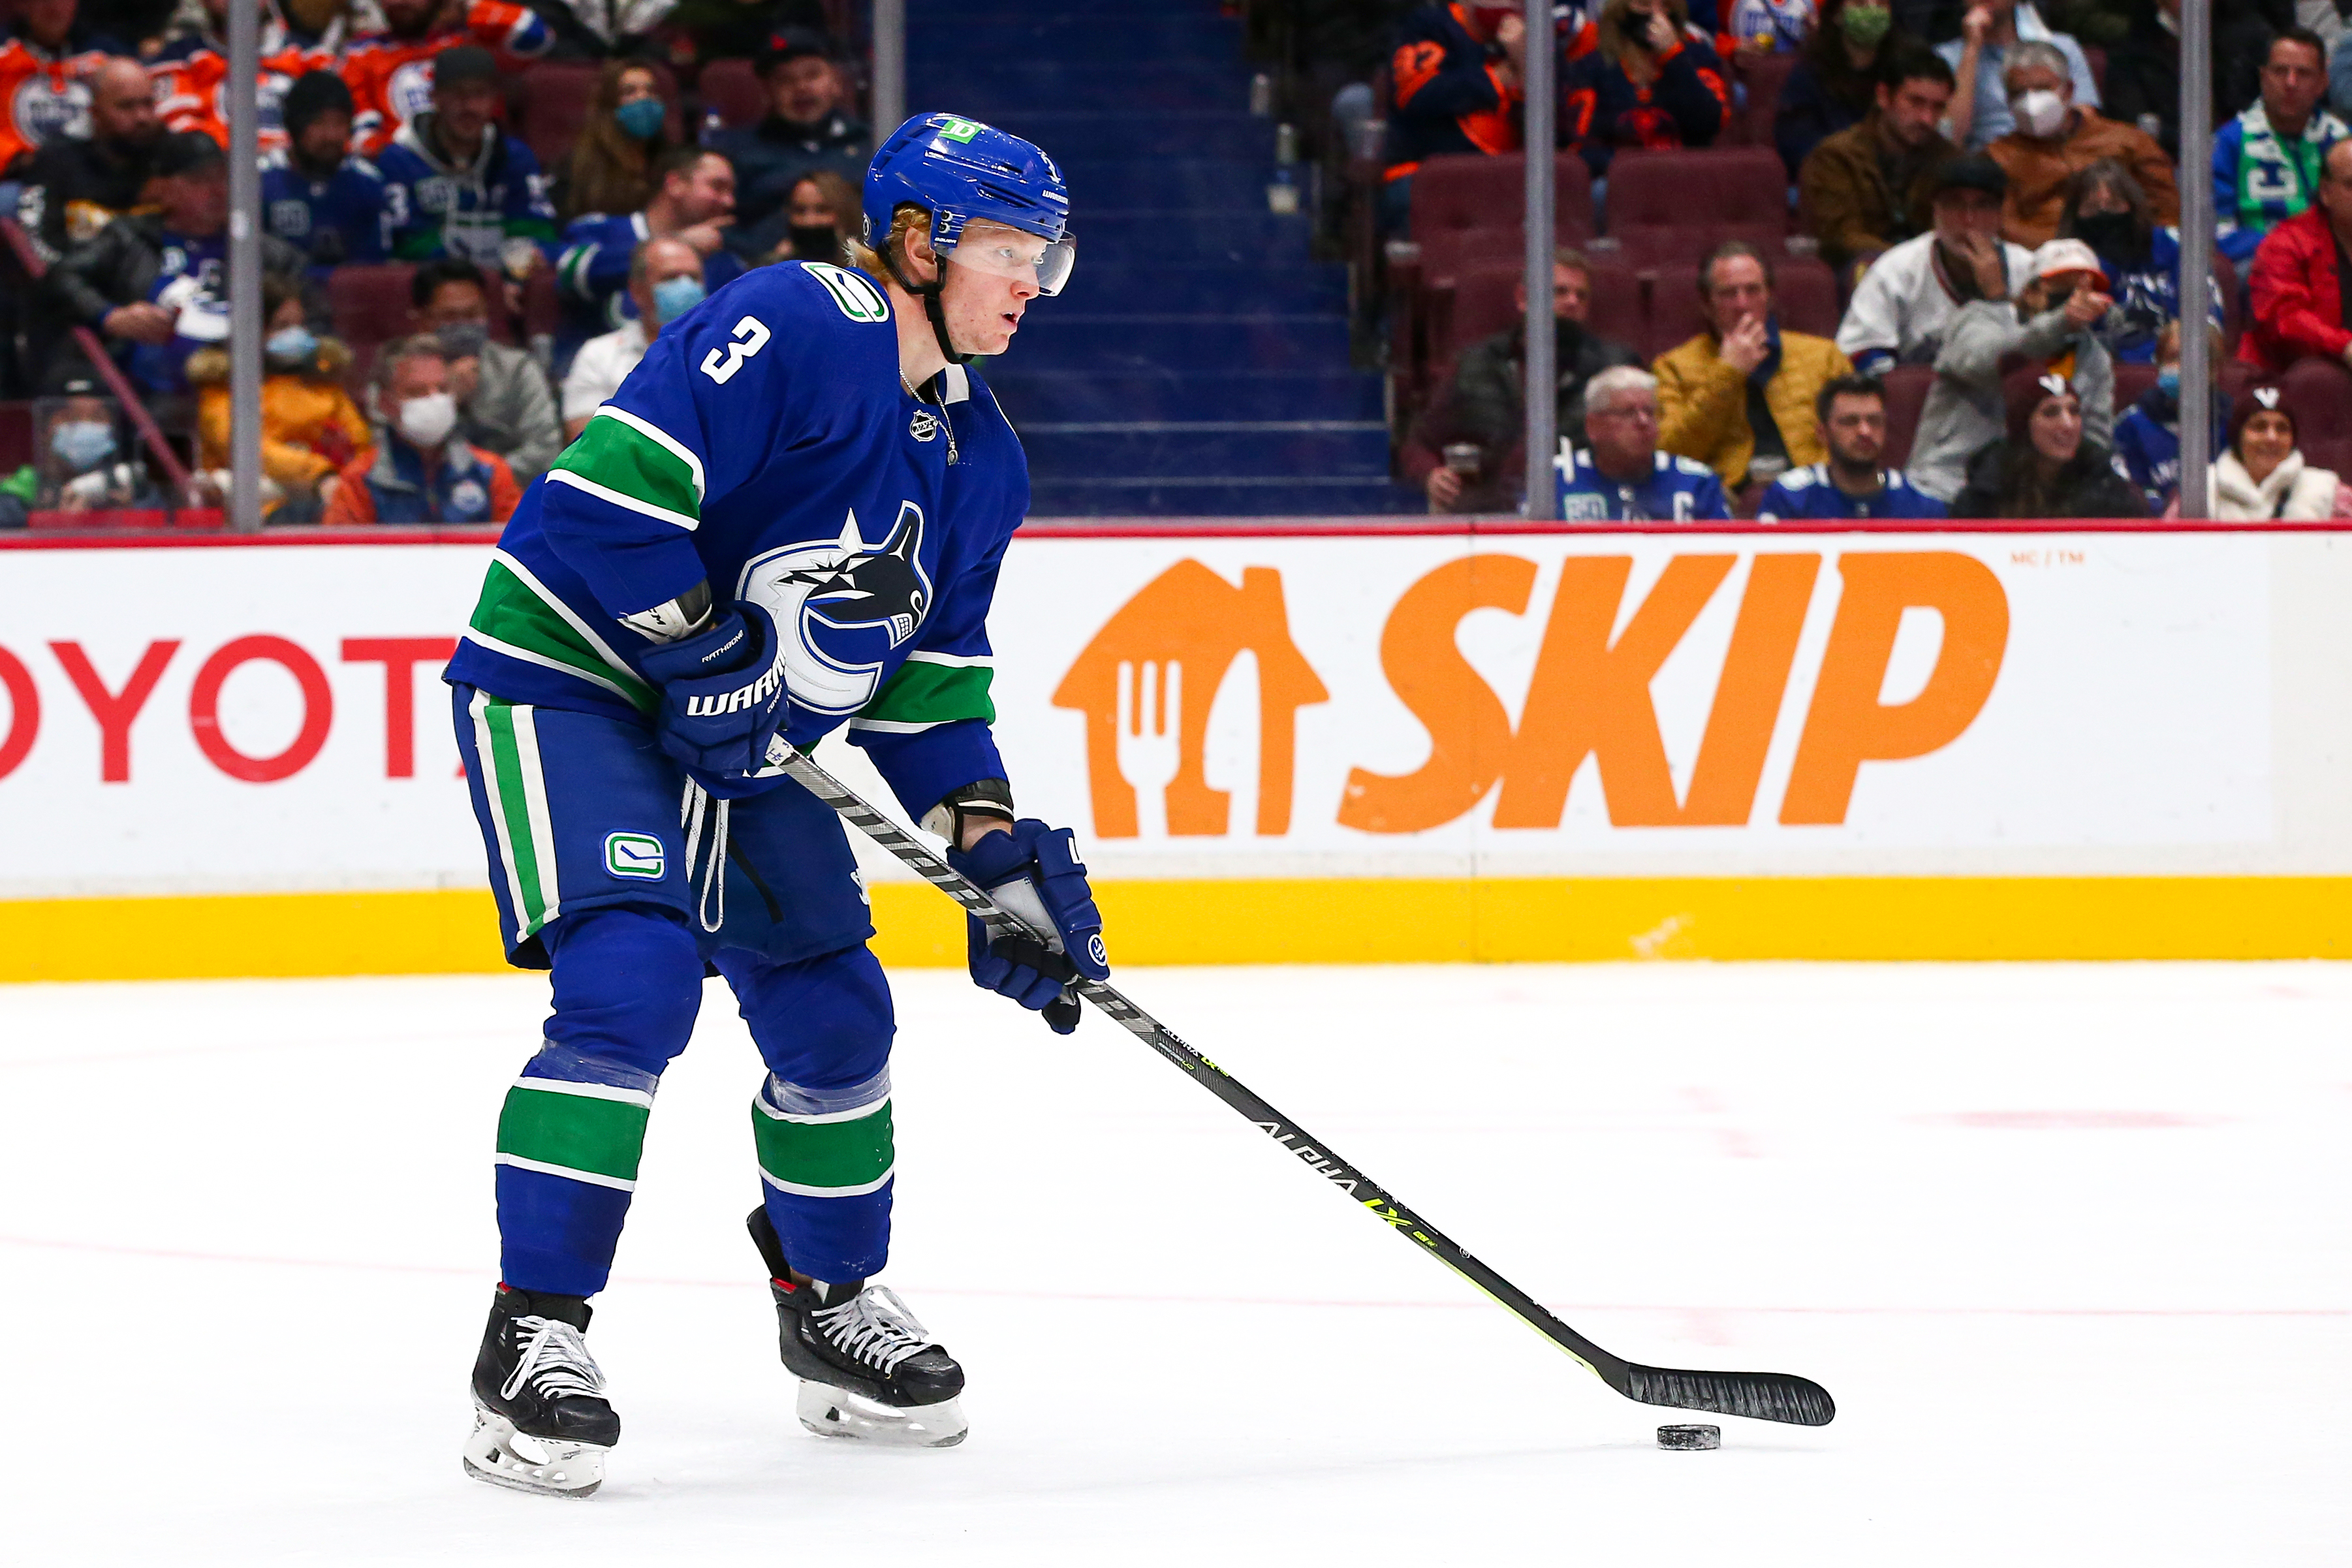 NHL: OCT 30 Oilers at Canucks